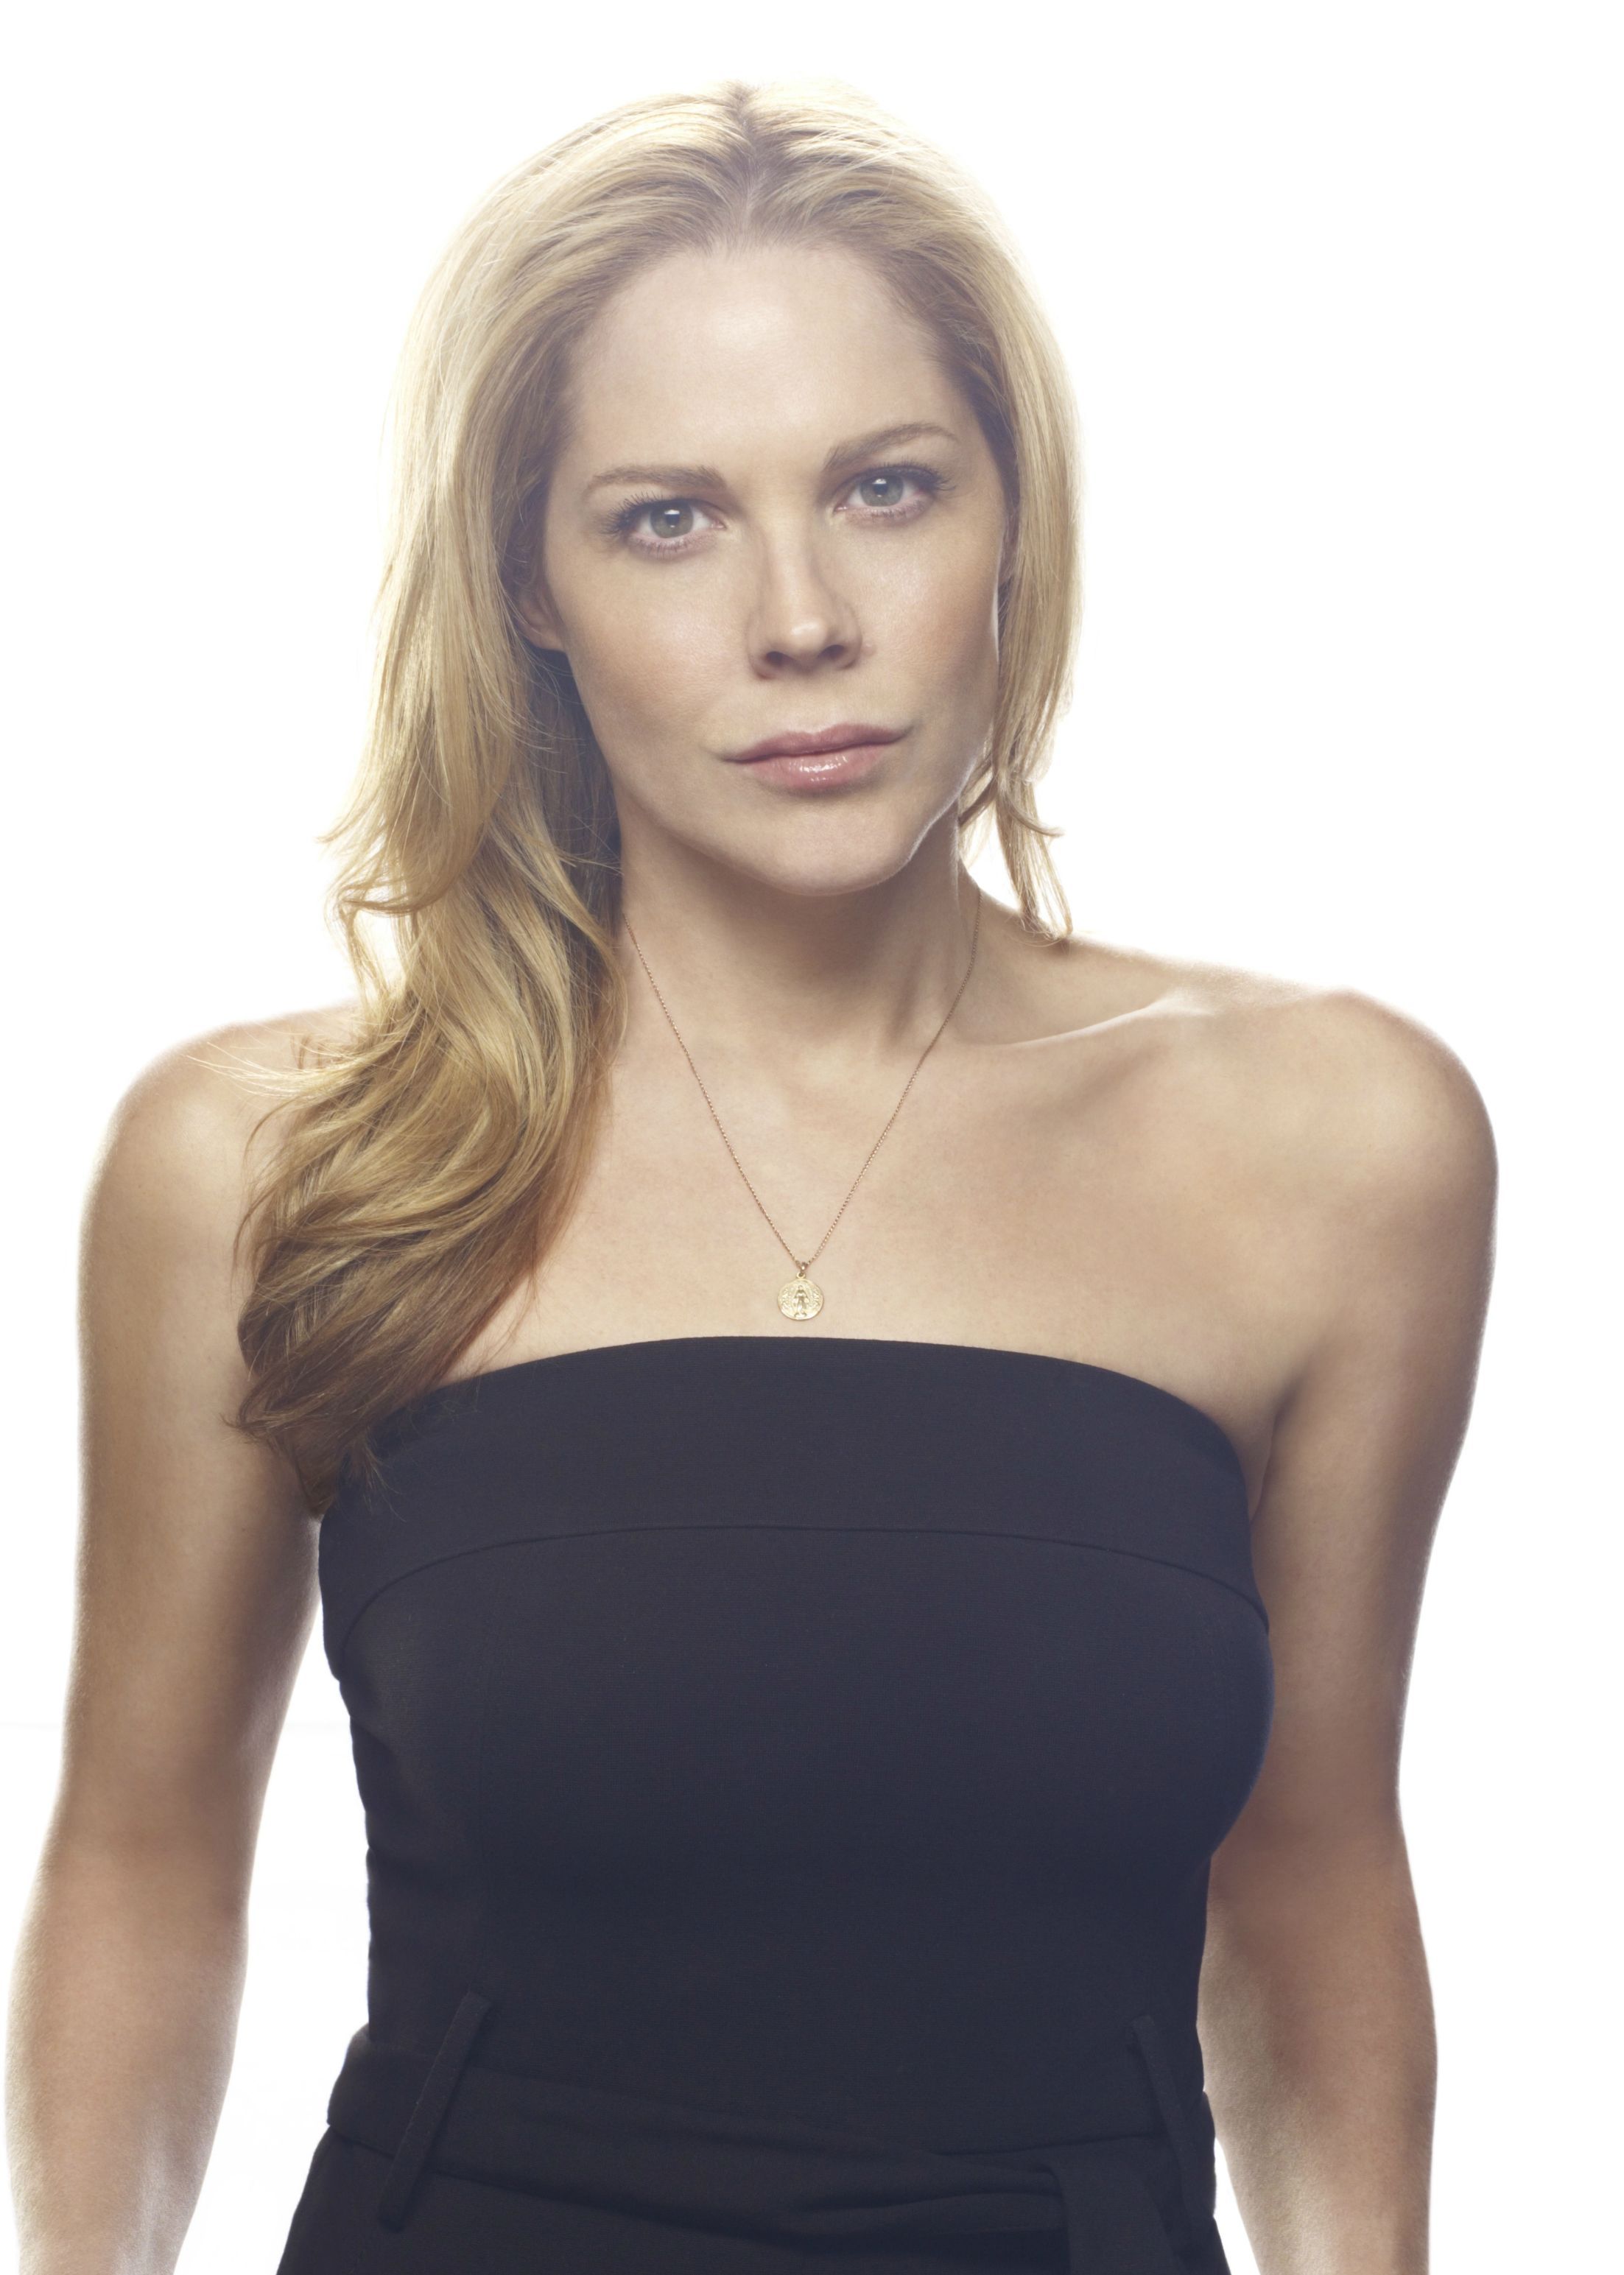 Pictures of Mary McCormack